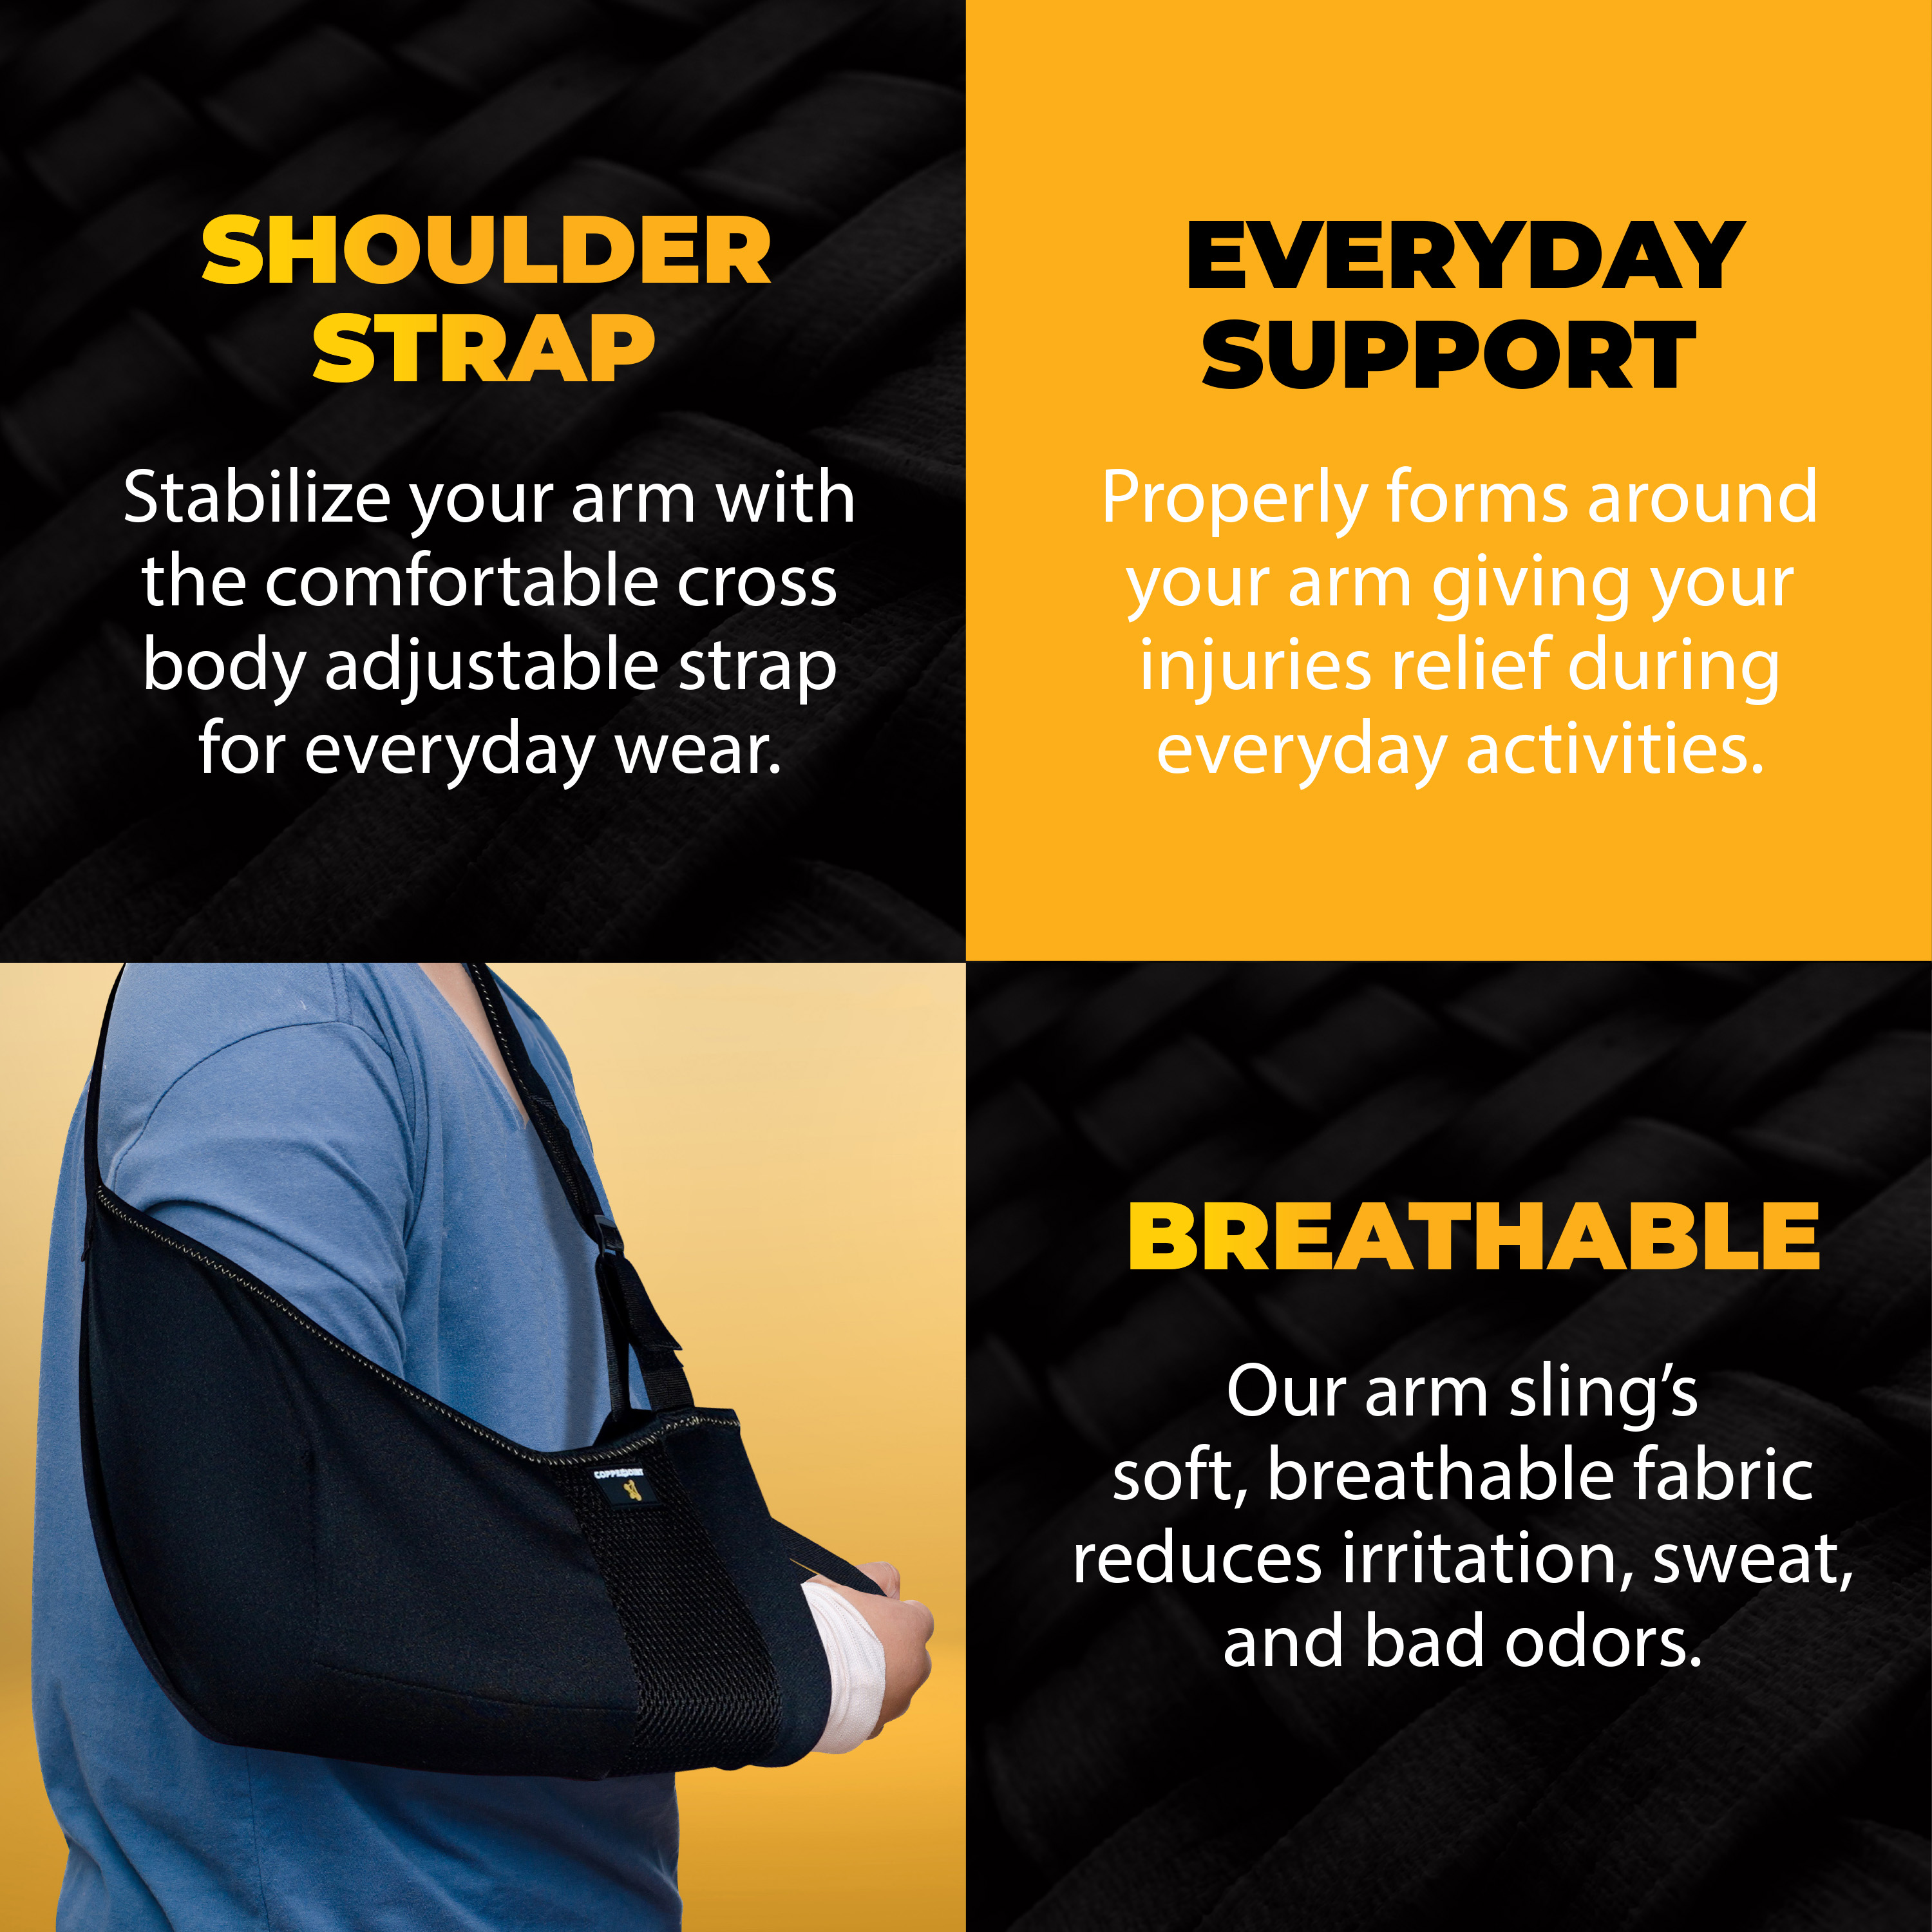 CopperJoint Offers Launch Discount on New Arm Sling For Shoulder Injury